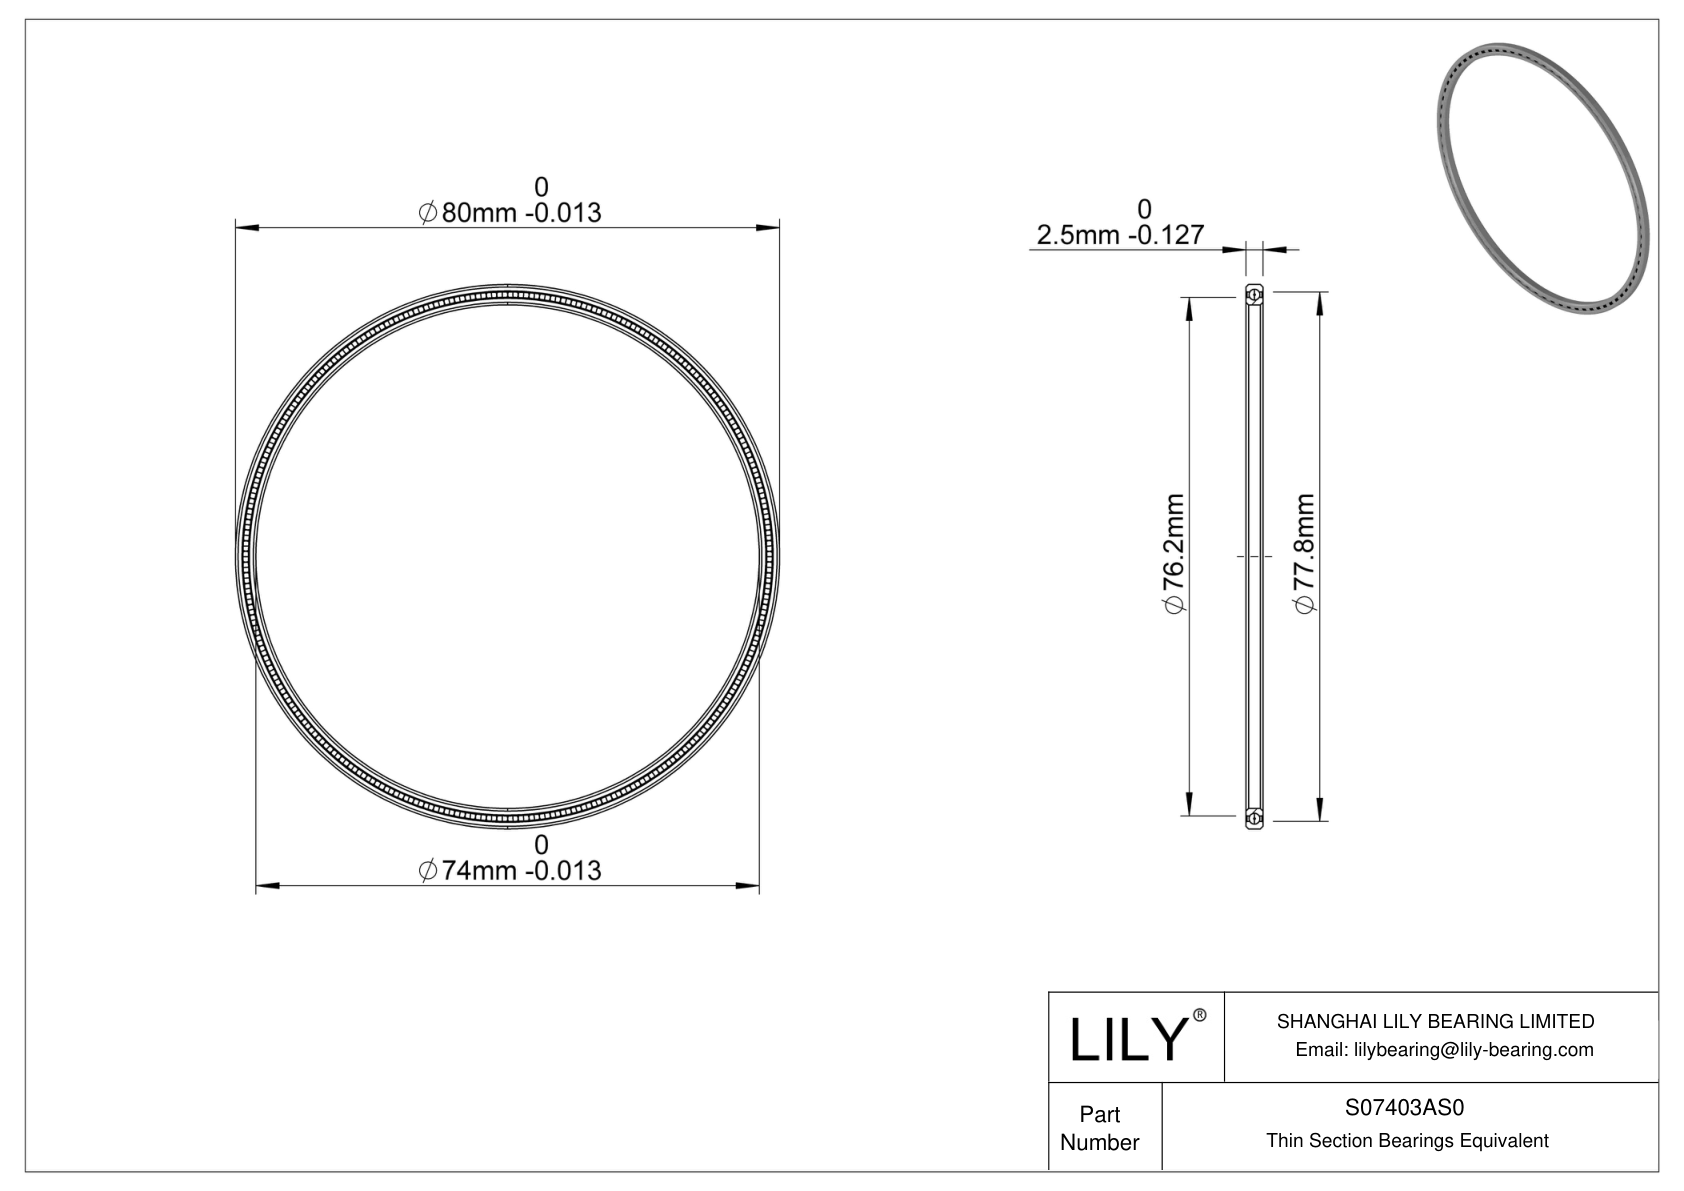 S07403AS0 Constant Section (CS) Bearings cad drawing